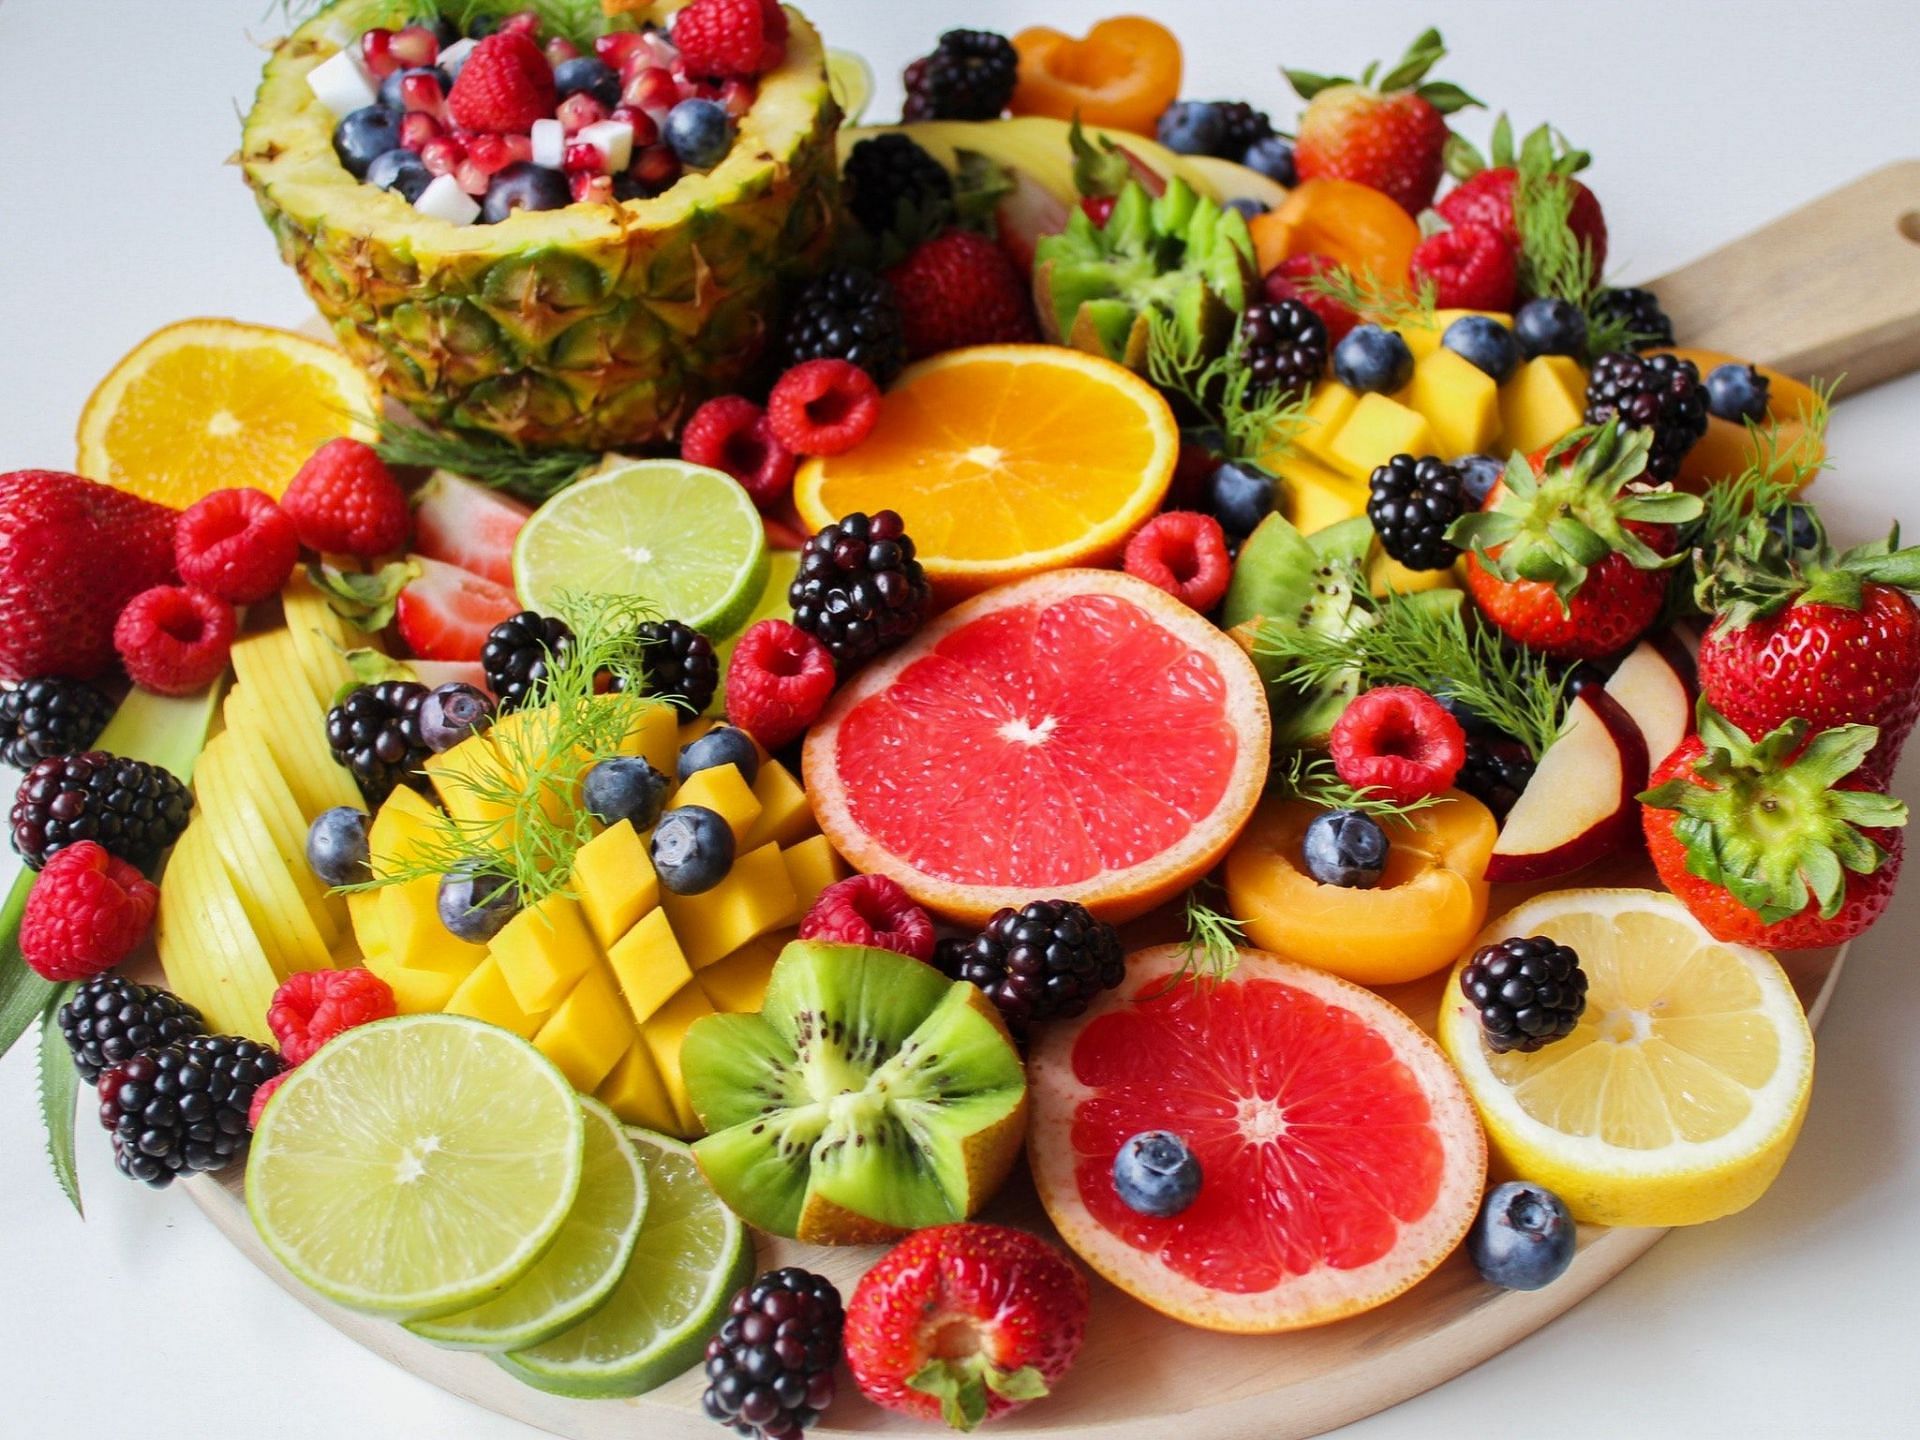 Best fruits for weight loss to try! (Image via Pexels/Jane Doan)